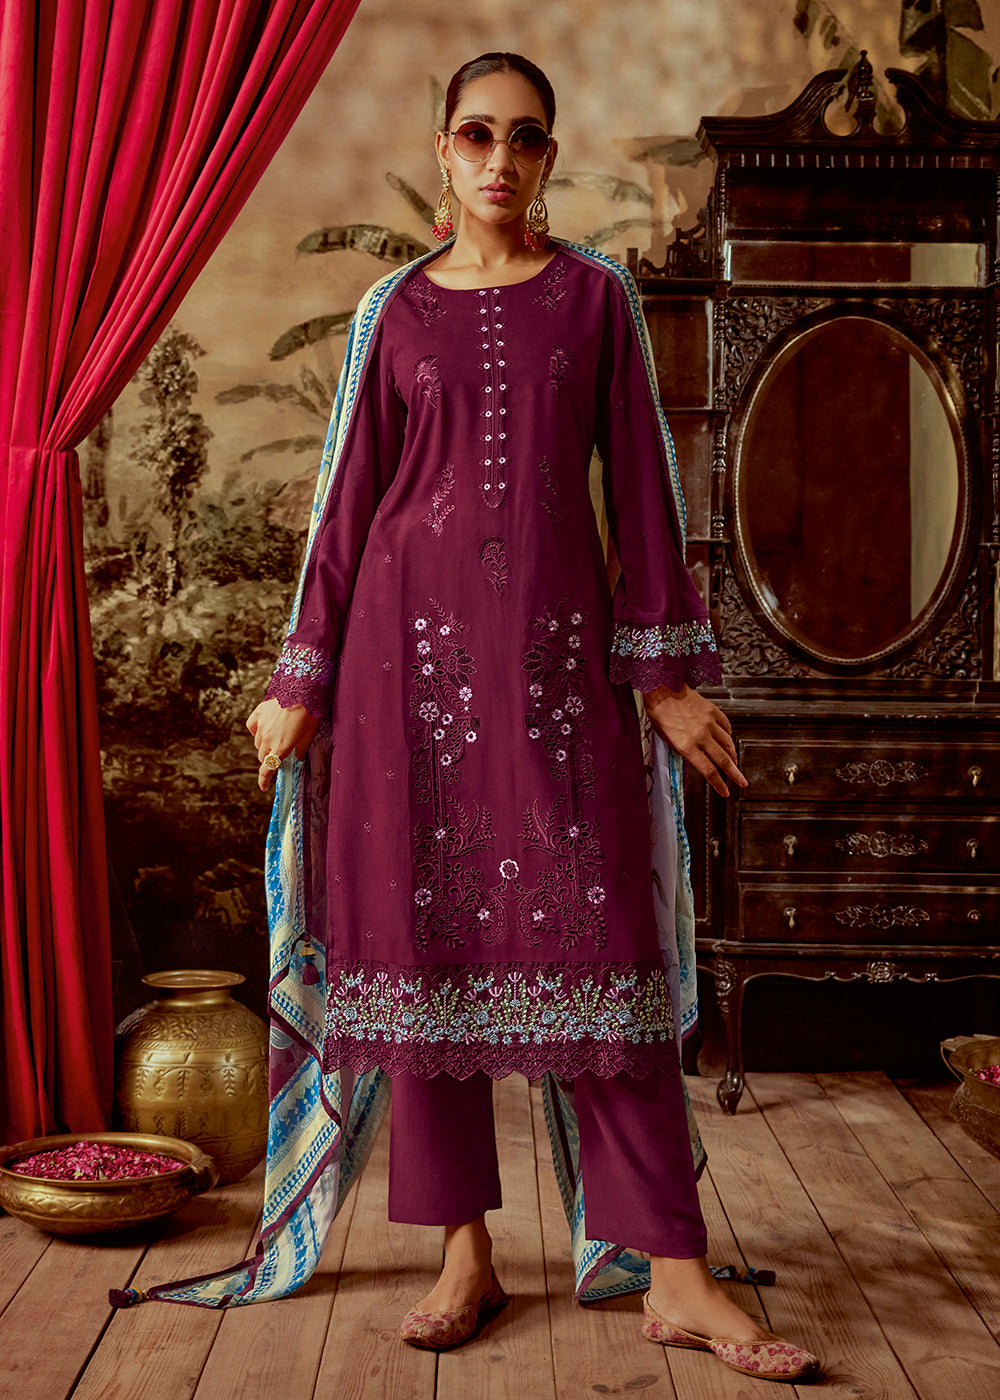 Buy Now Charming Wine Parsi Style Embroidered Festive Salwar Suit Online in USA, UK, Canada, Germany, Australia & Worldwide at Empress Clothing.